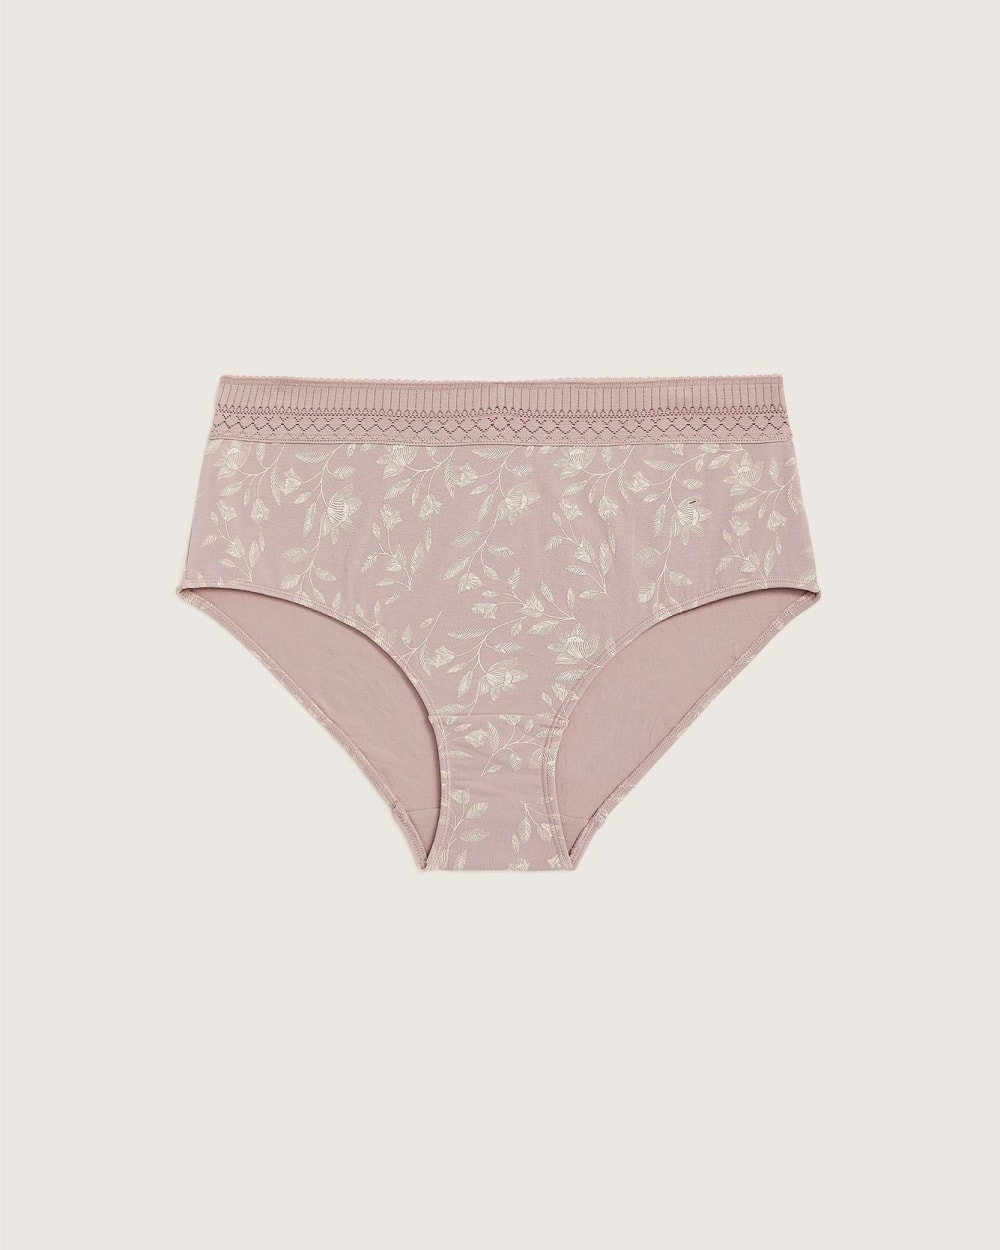 Printed Full Brief with Lace Waistband - tiVOGLIO | Penningtons